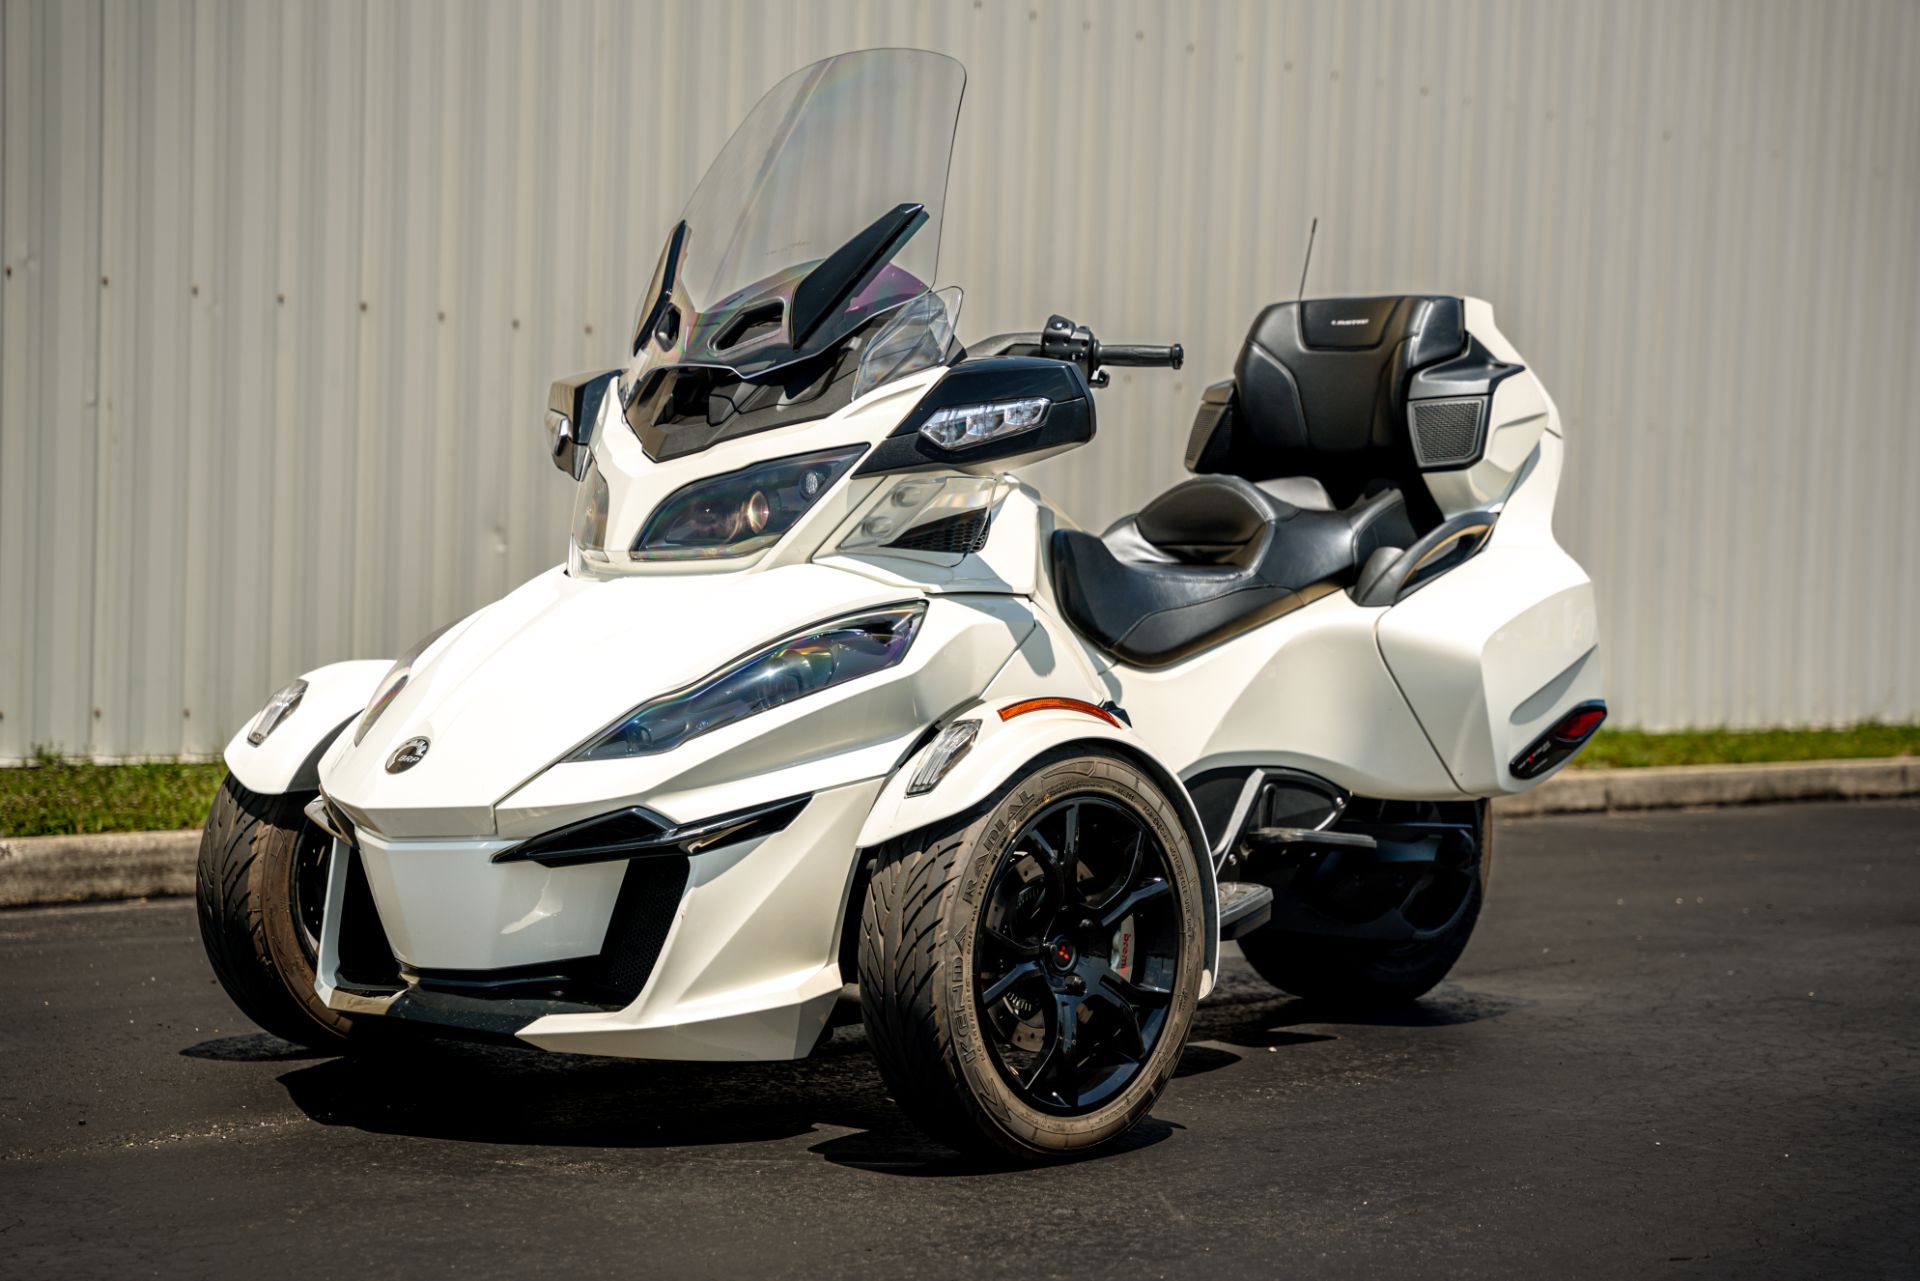 2019 Can-Am Spyder RT Limited in Jacksonville, Florida - Photo 7